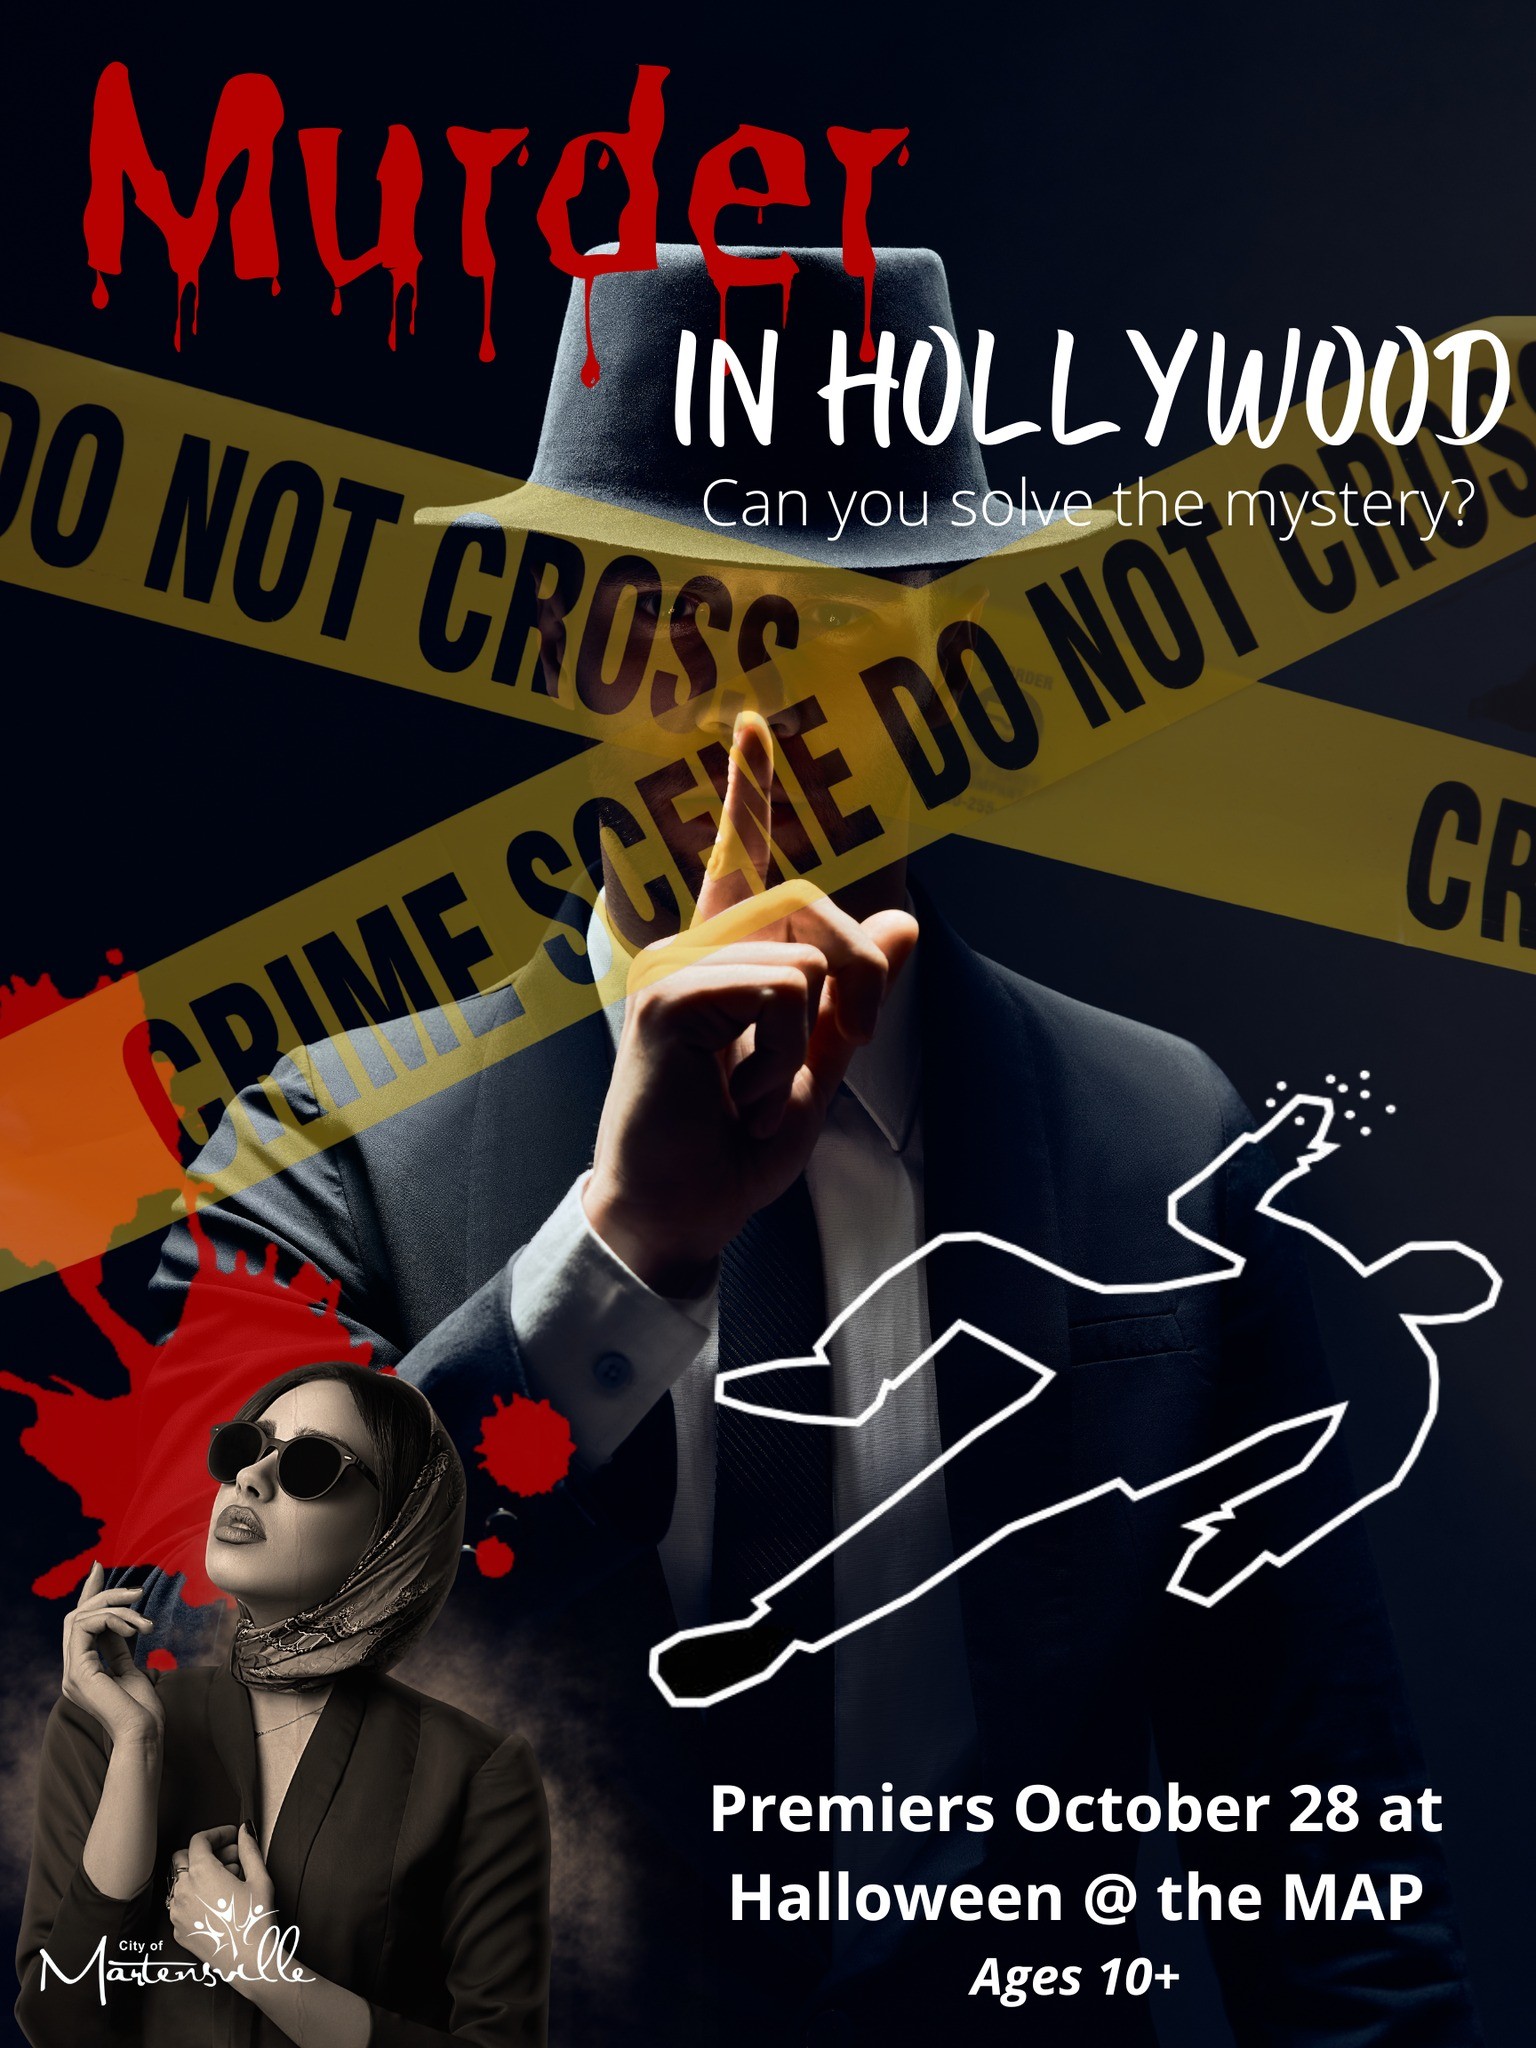 Mord in Hollywood